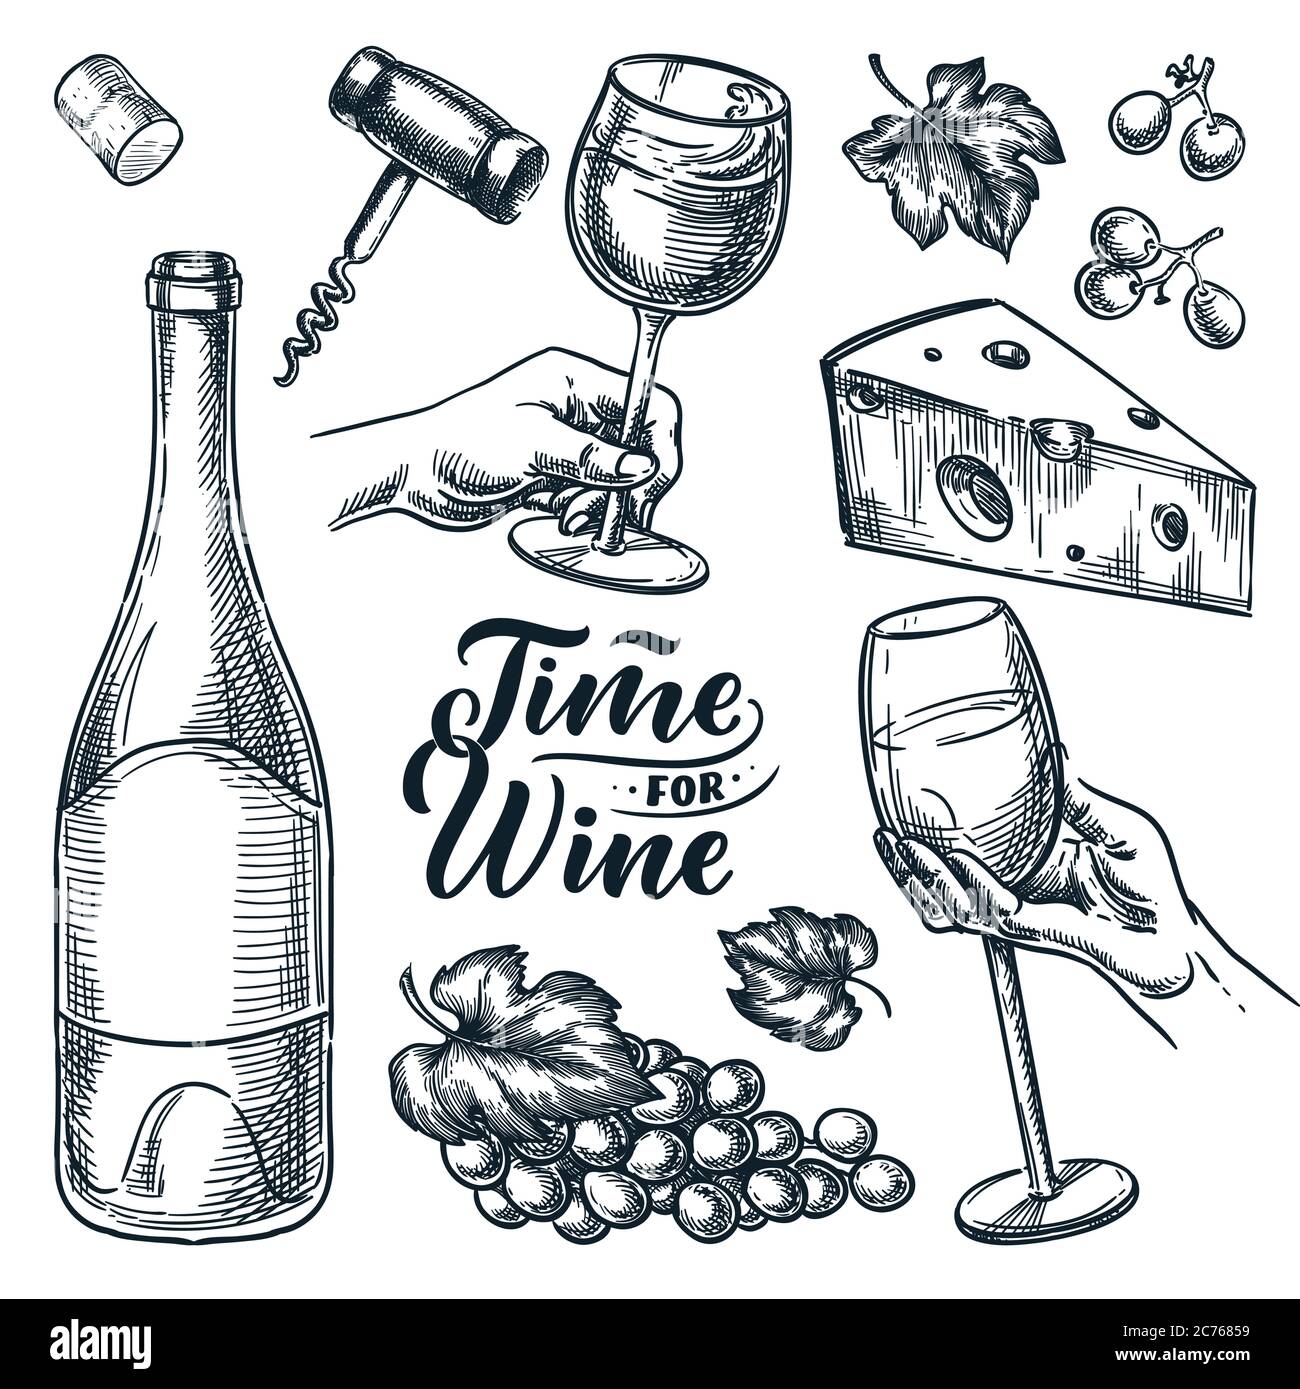 Time for wine vector hand drawn sketch illustration. Human hand holding wine glass. Bottle, cheese, grape vine, cork, corkscrew, isolated on white bac Stock Vector